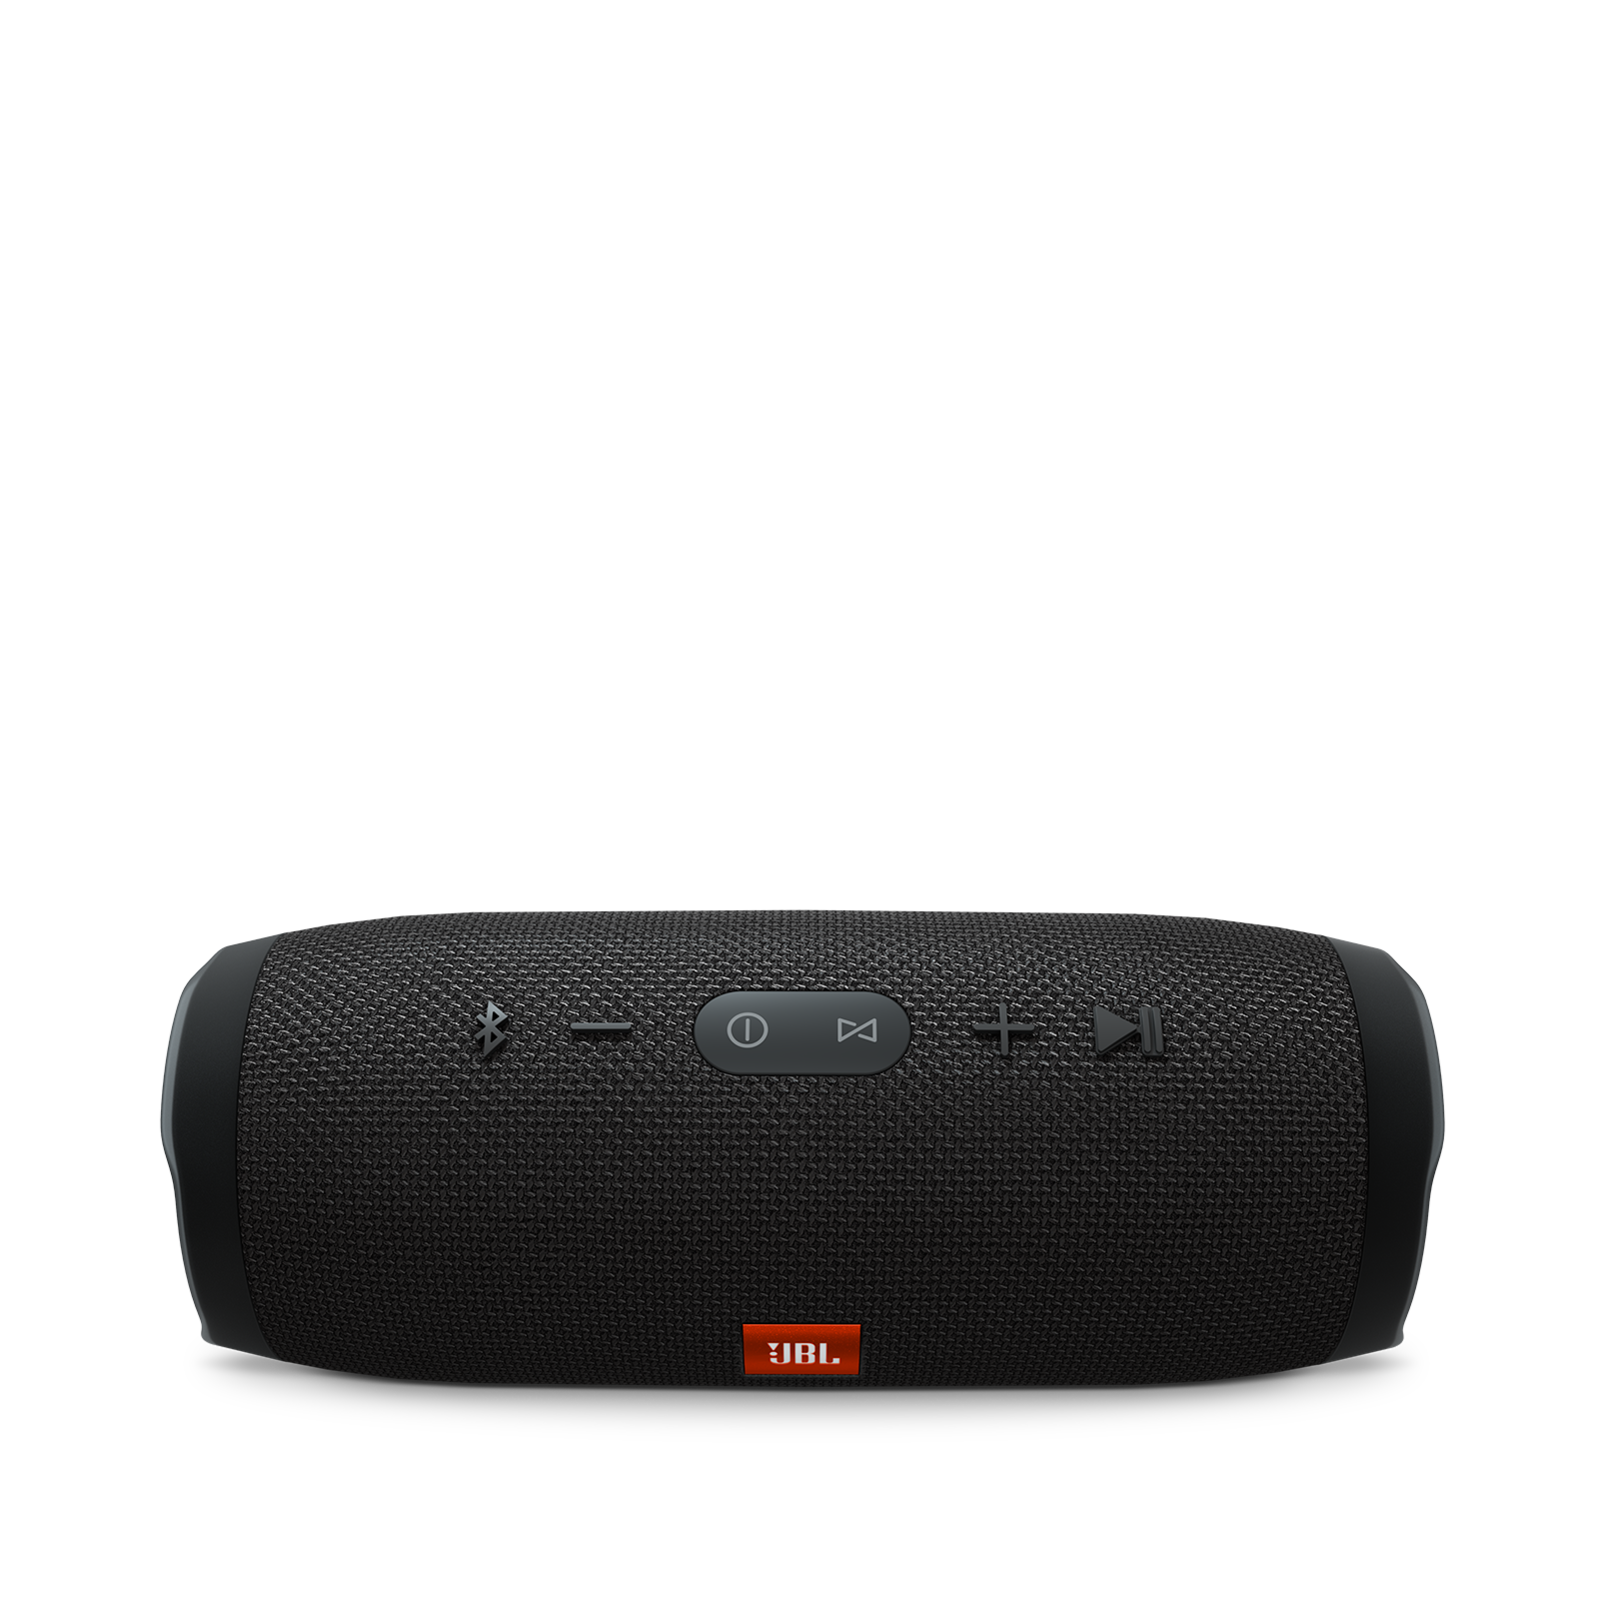 JBL Charge 3 - Black - Full-featured waterproof portable speaker with high-capacity battery to charge your devices - Detailshot 2